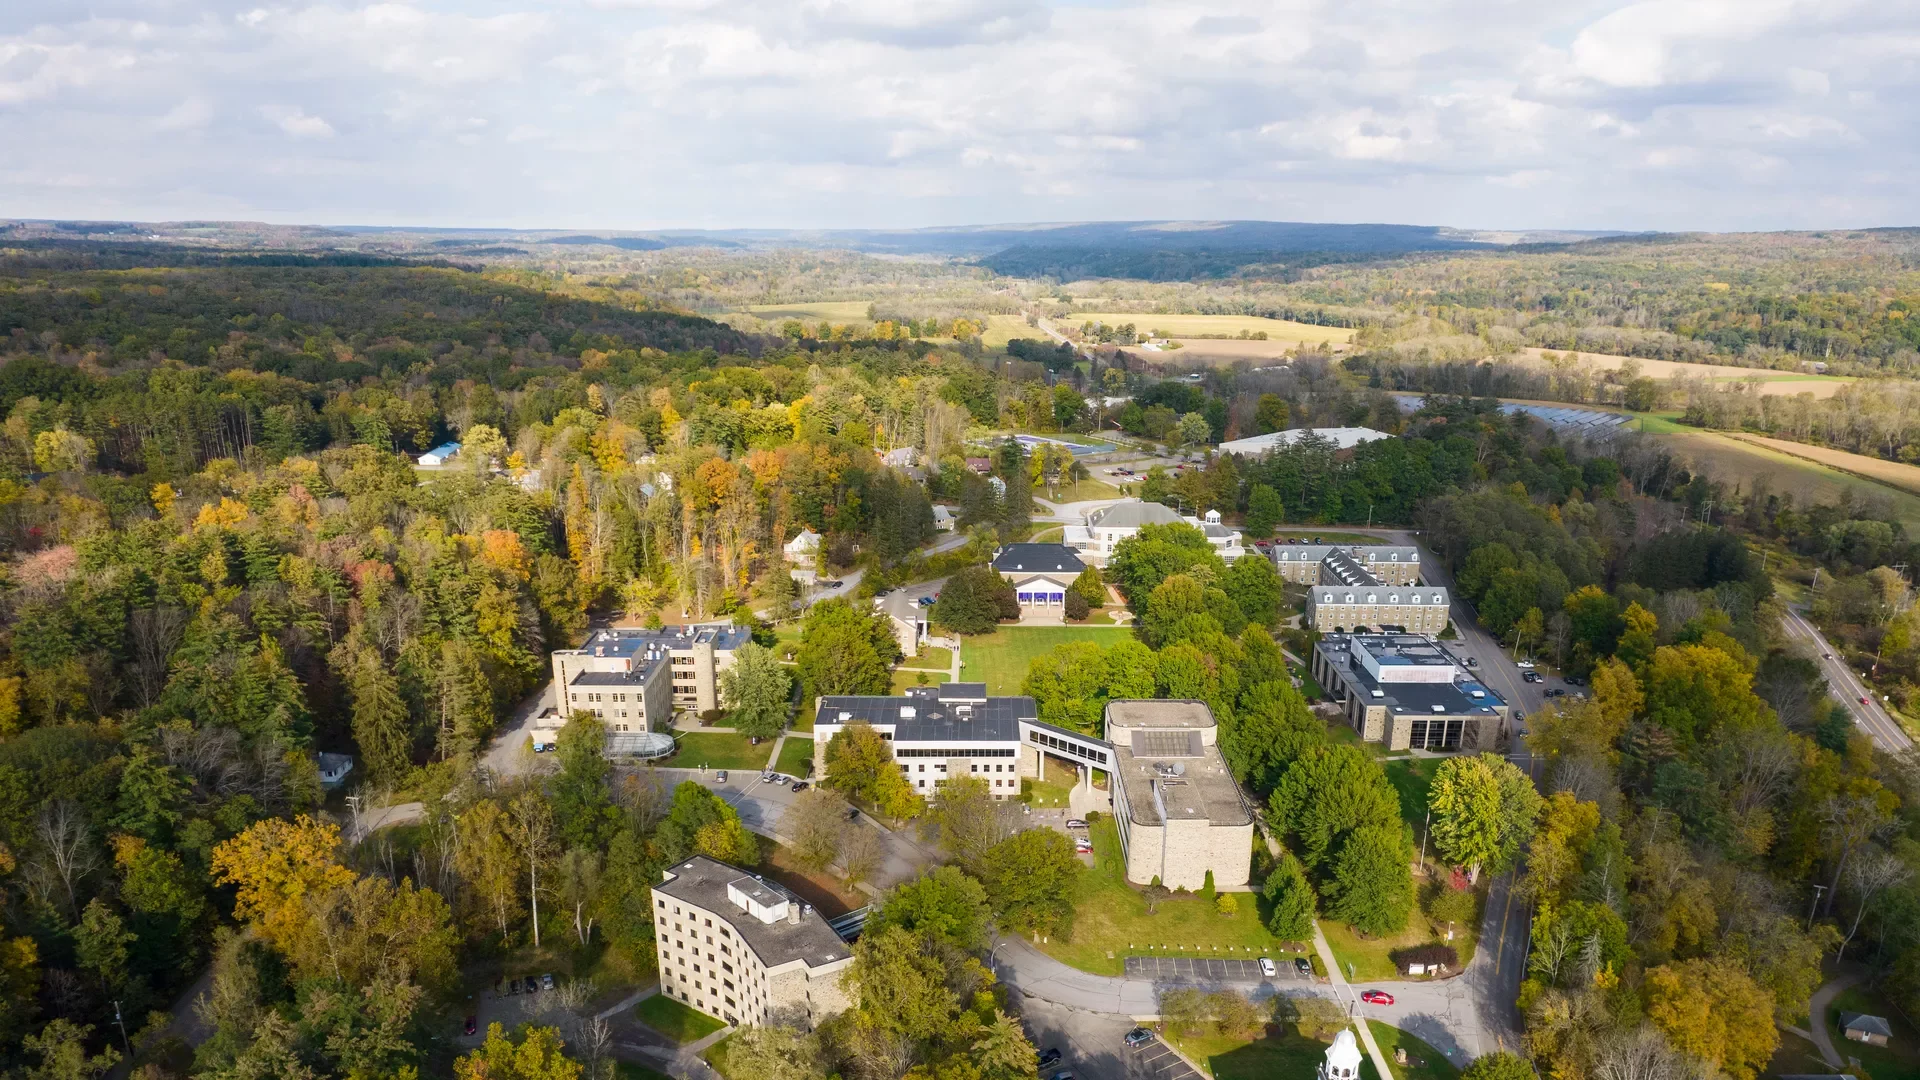 Aerial view of Houghton's campus located in the Genesee Valley of Western NY.